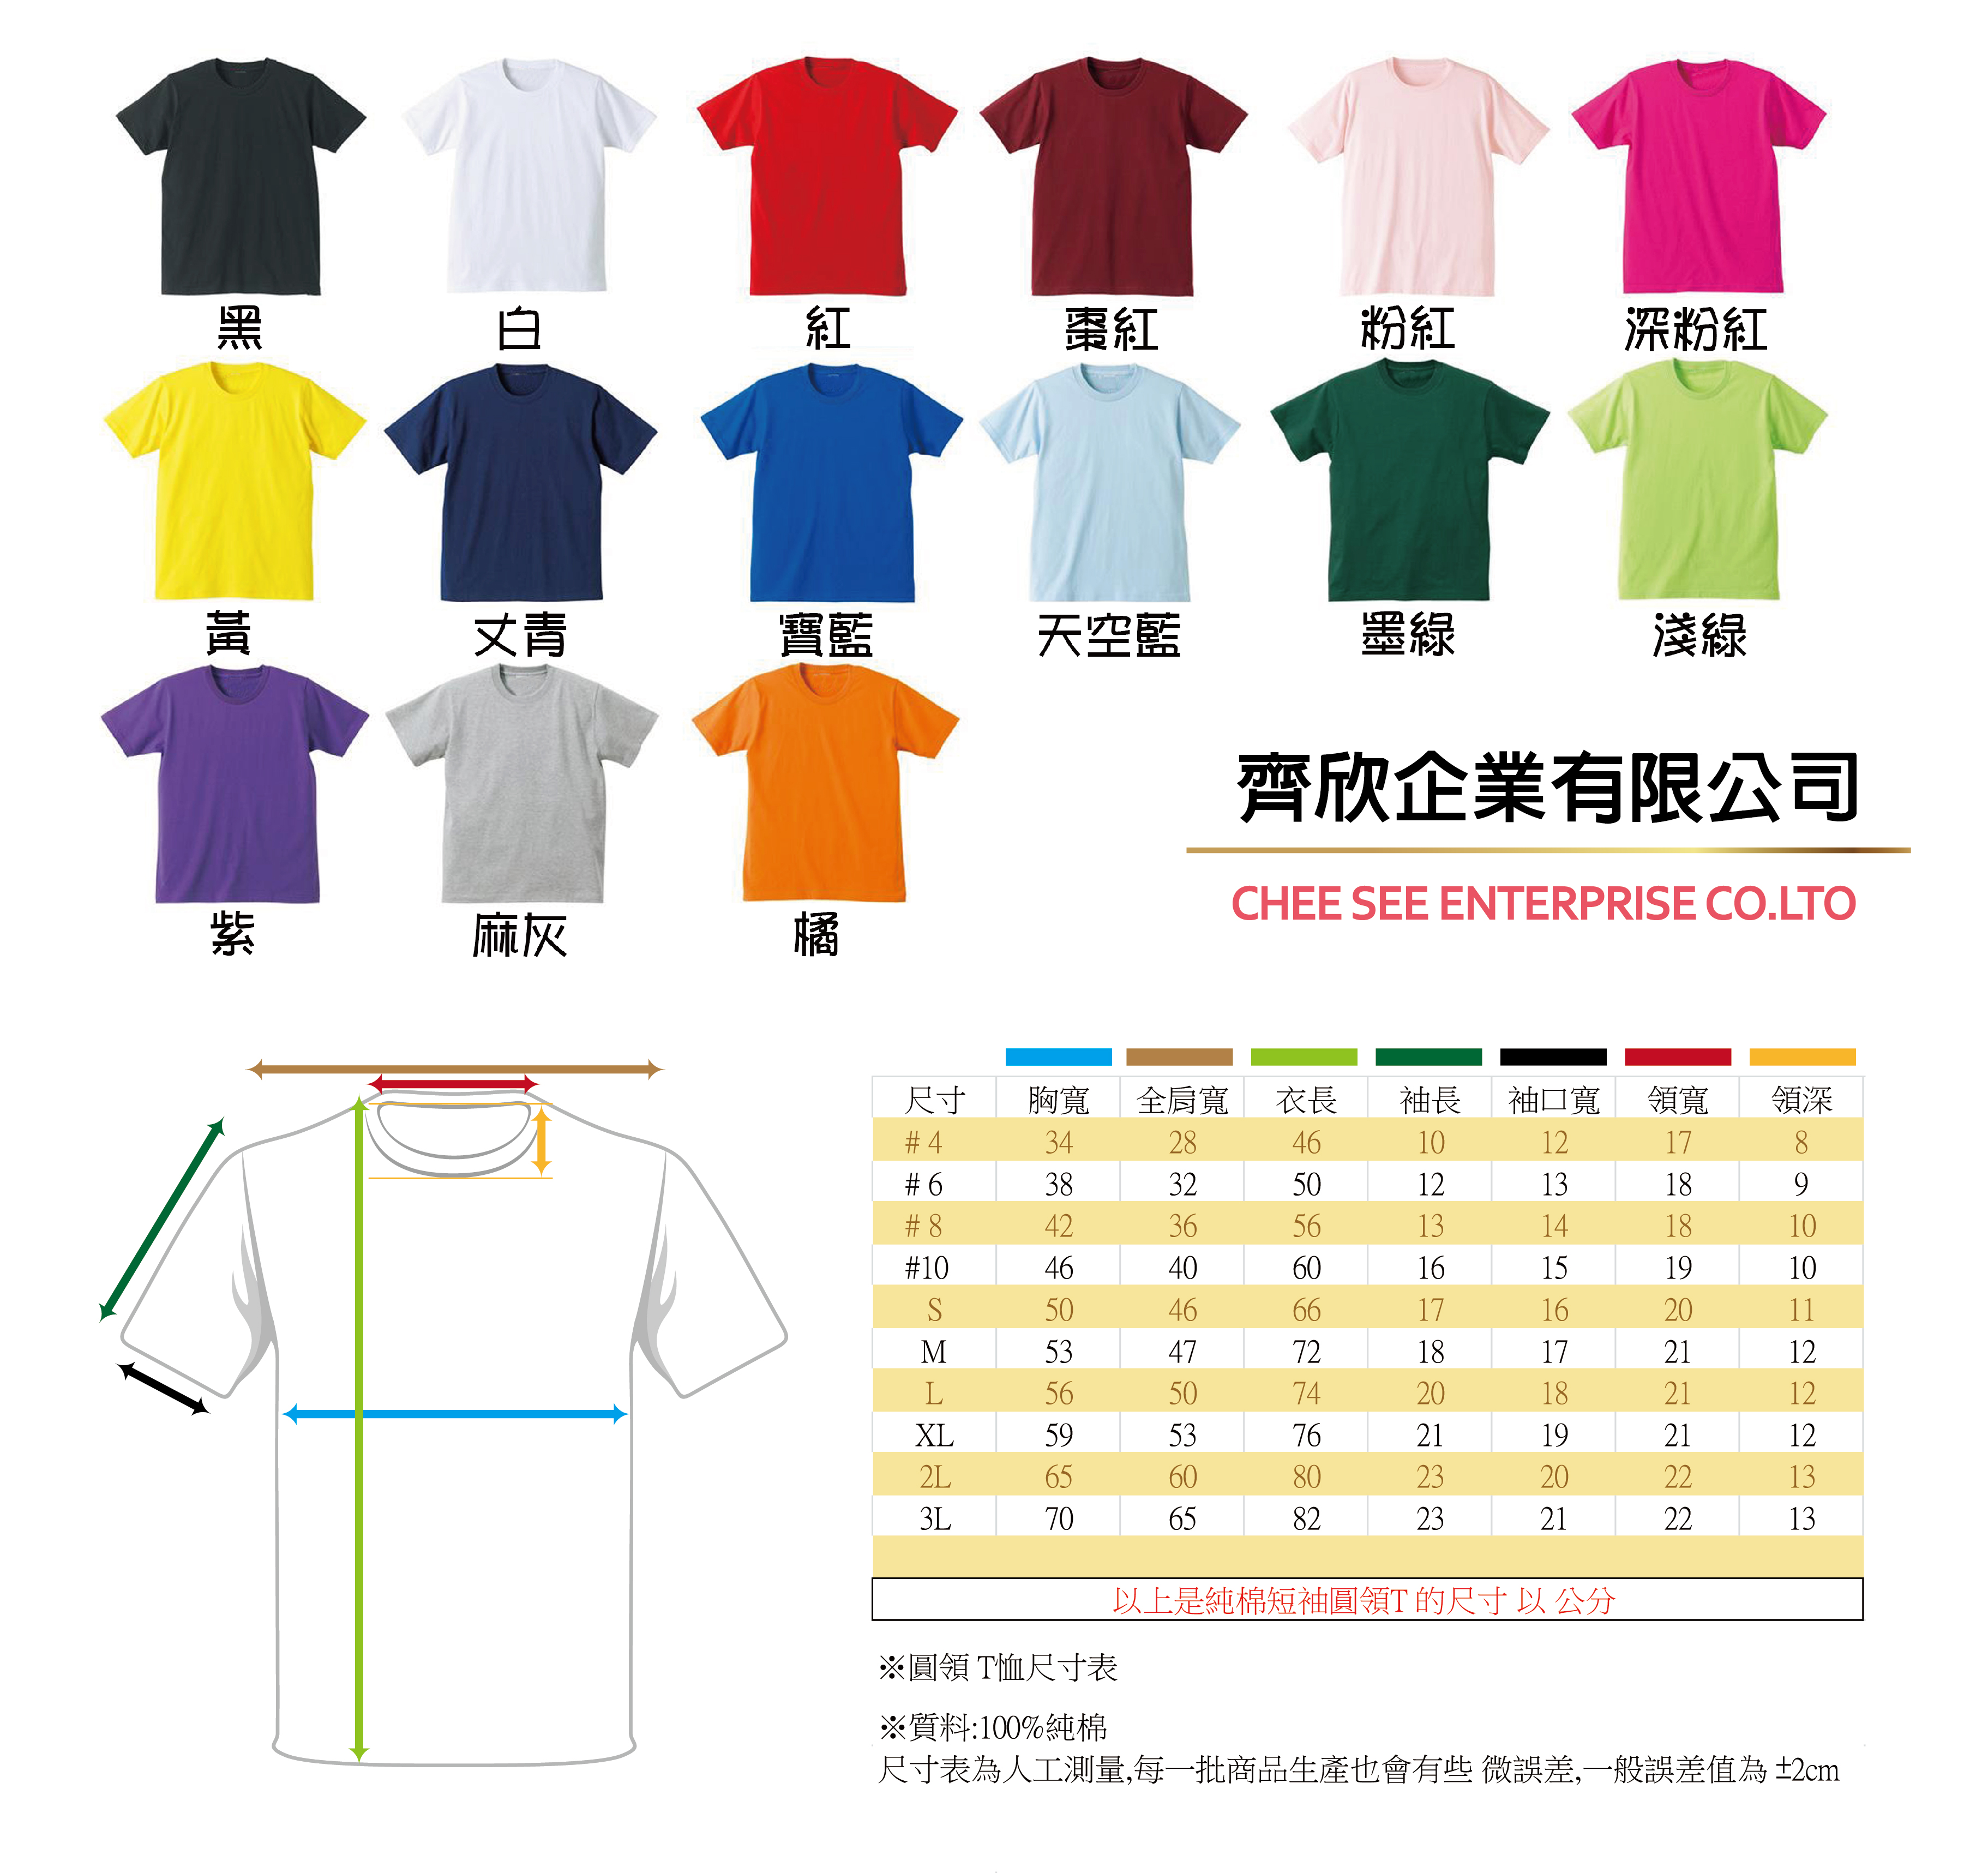 Tshirts color&size